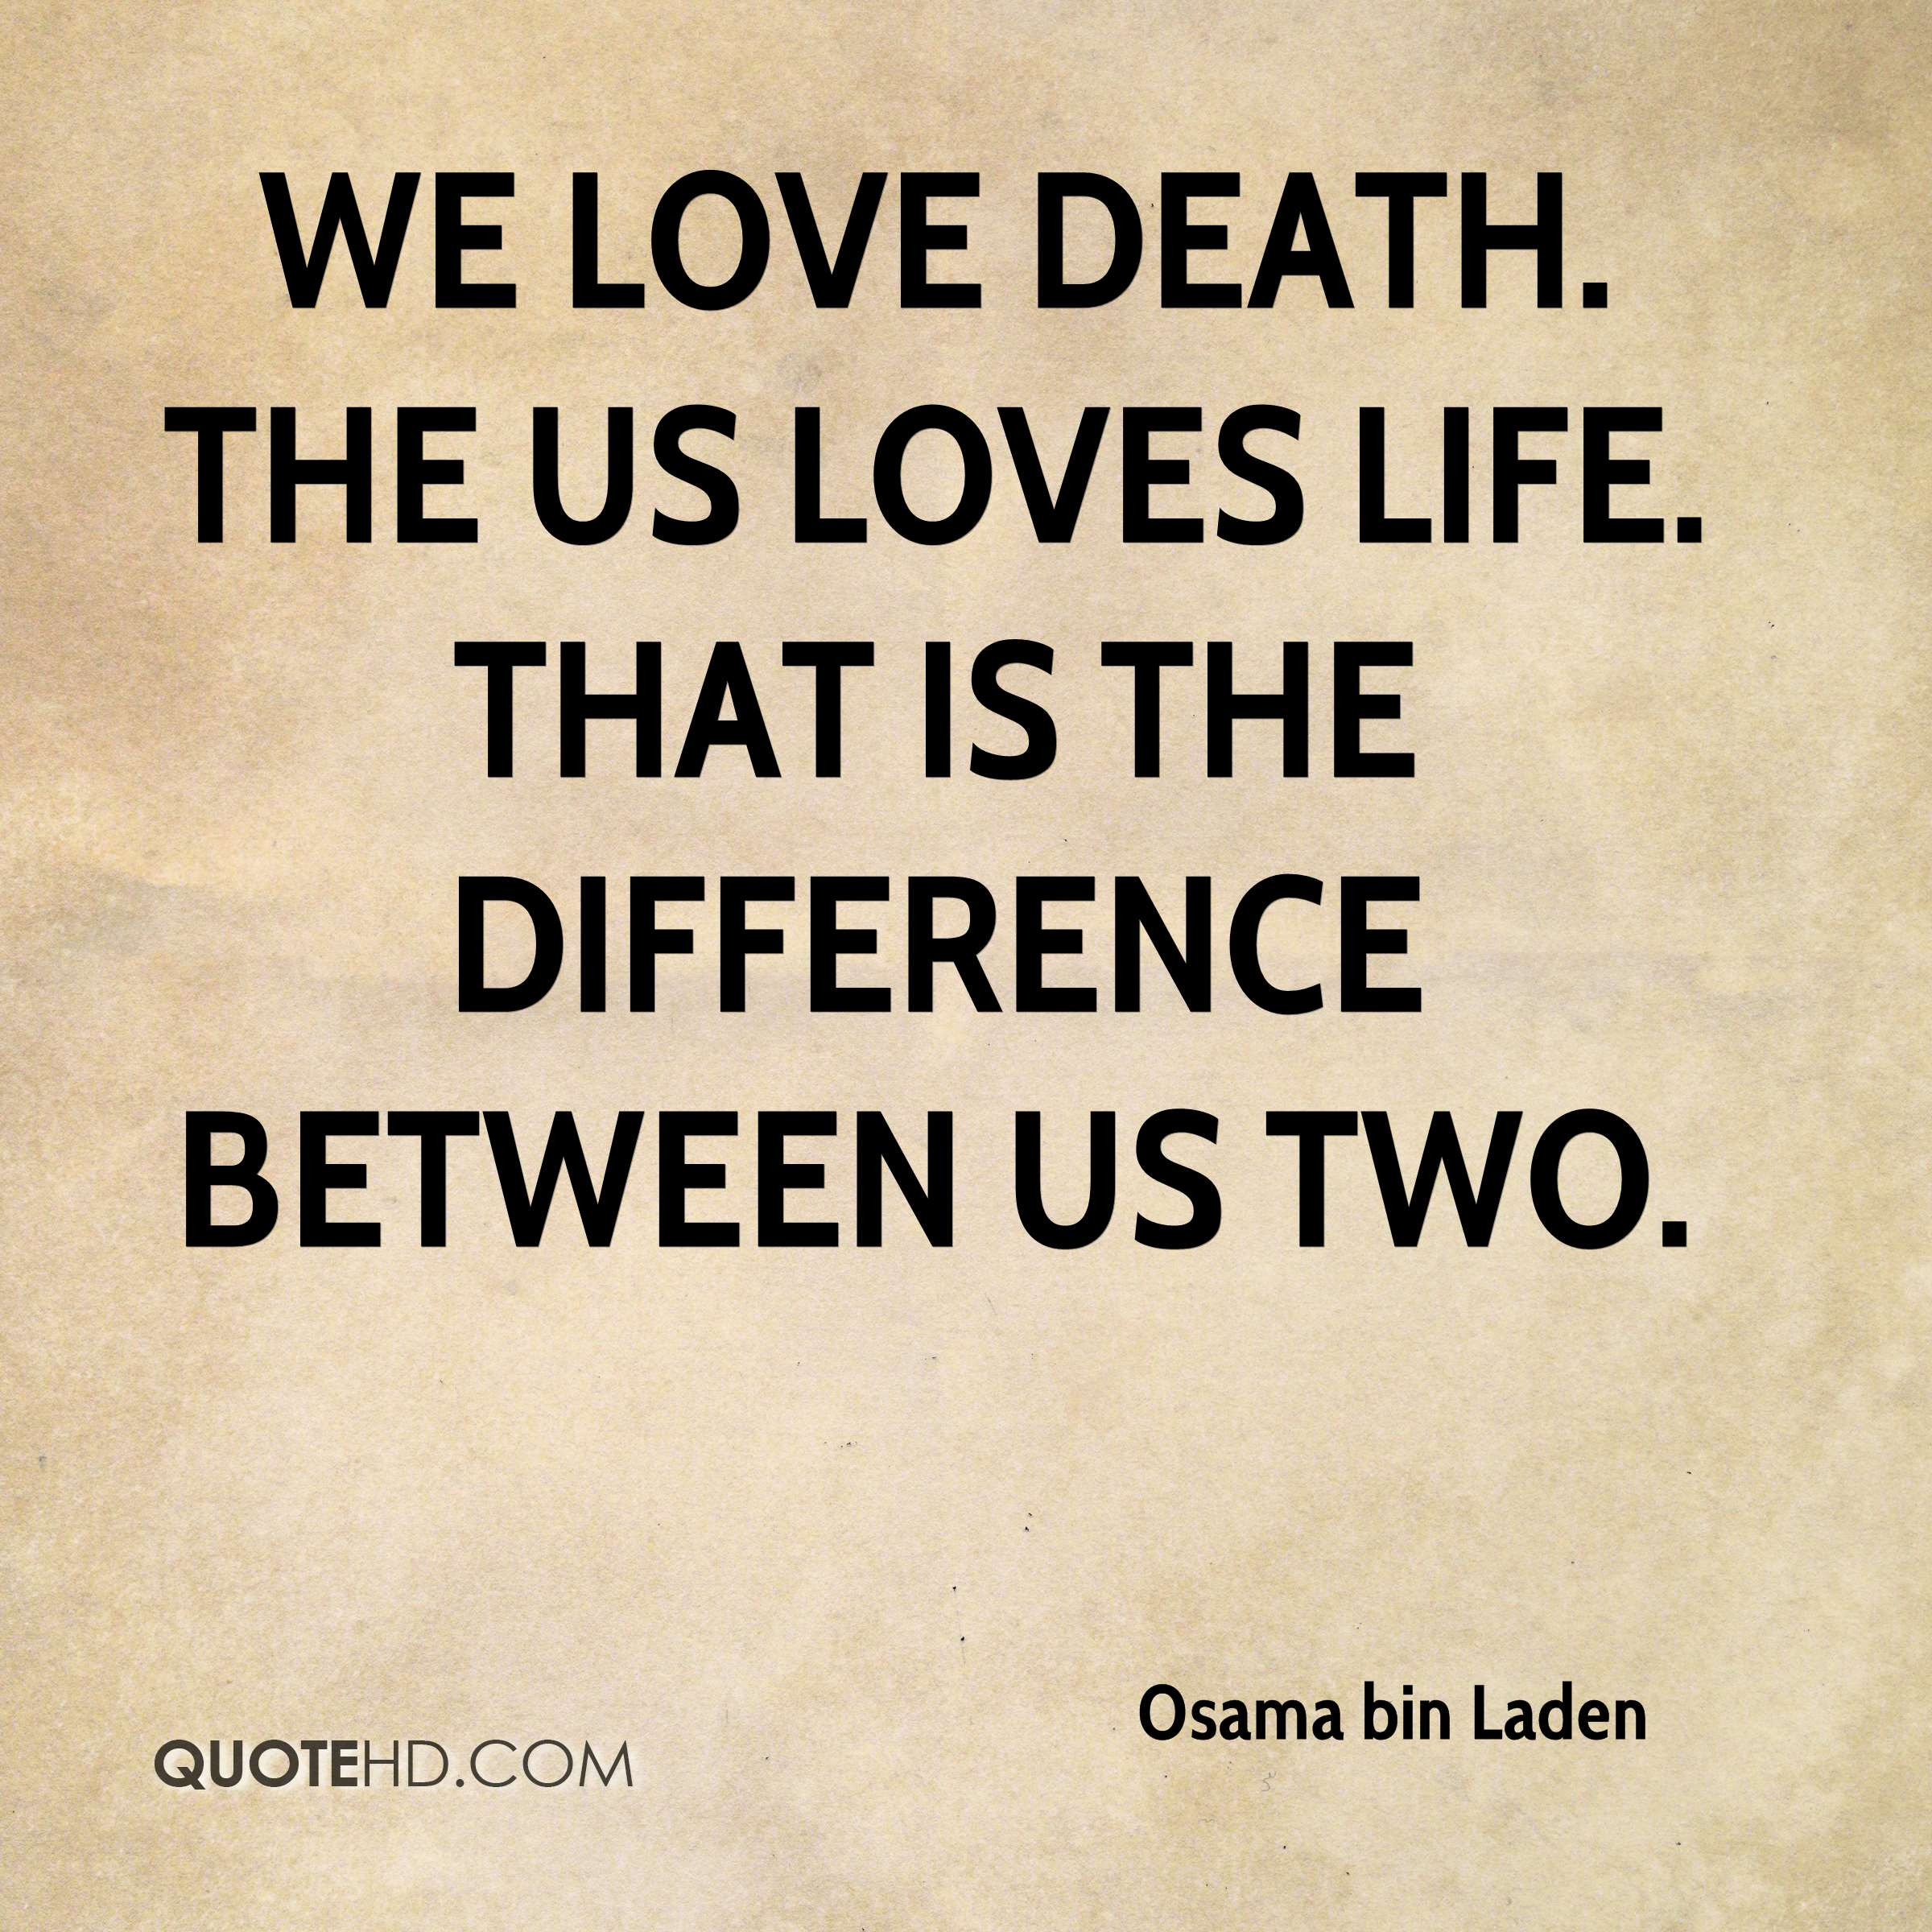 Quotes About Love And Death
 Quotes About Love Death